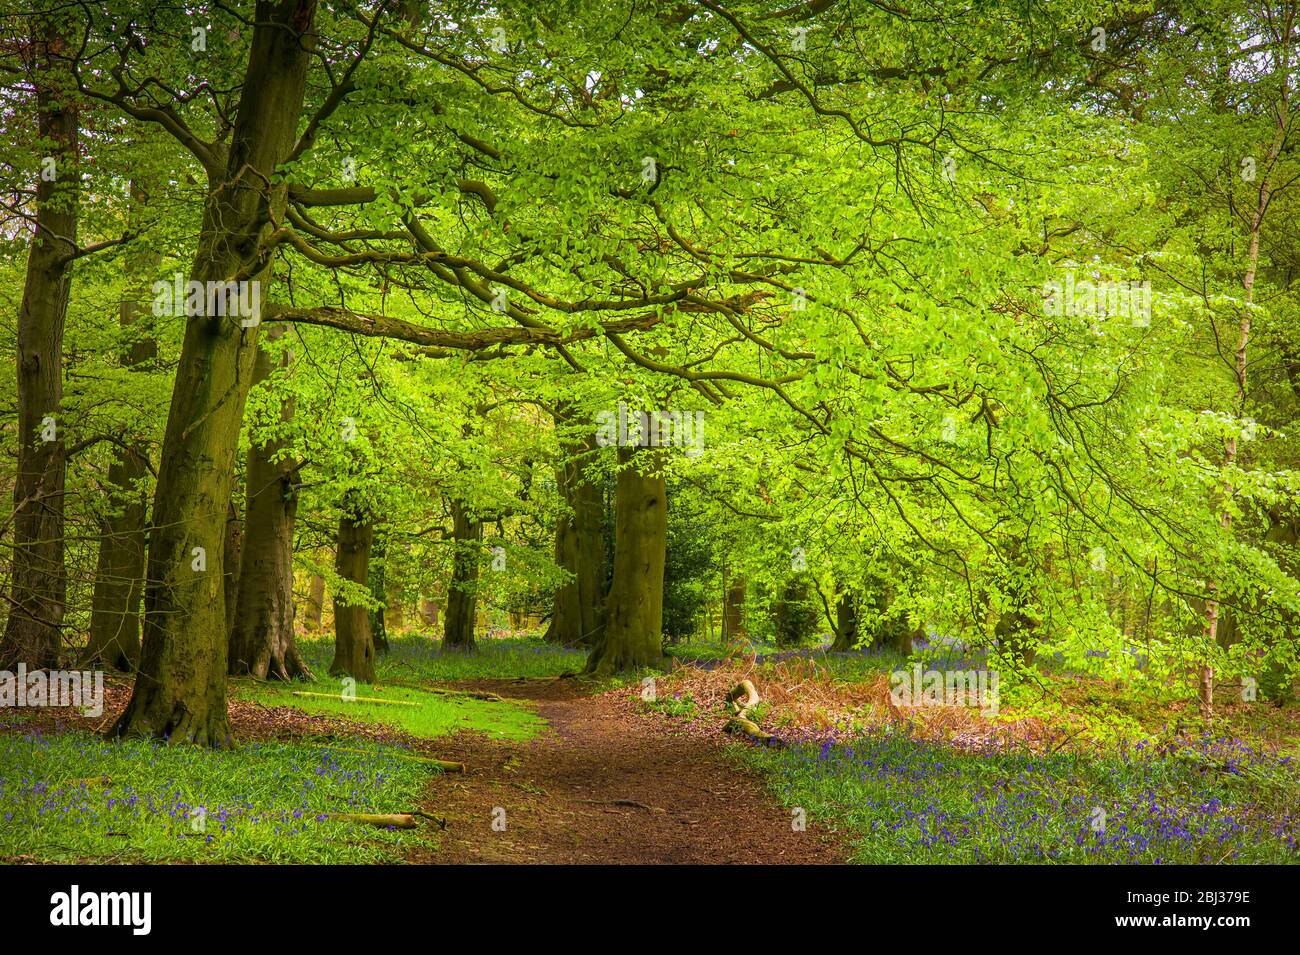 The Outwoods are110 acres of ancient woodland on the edge of Charnwood Forest. Stock Photo